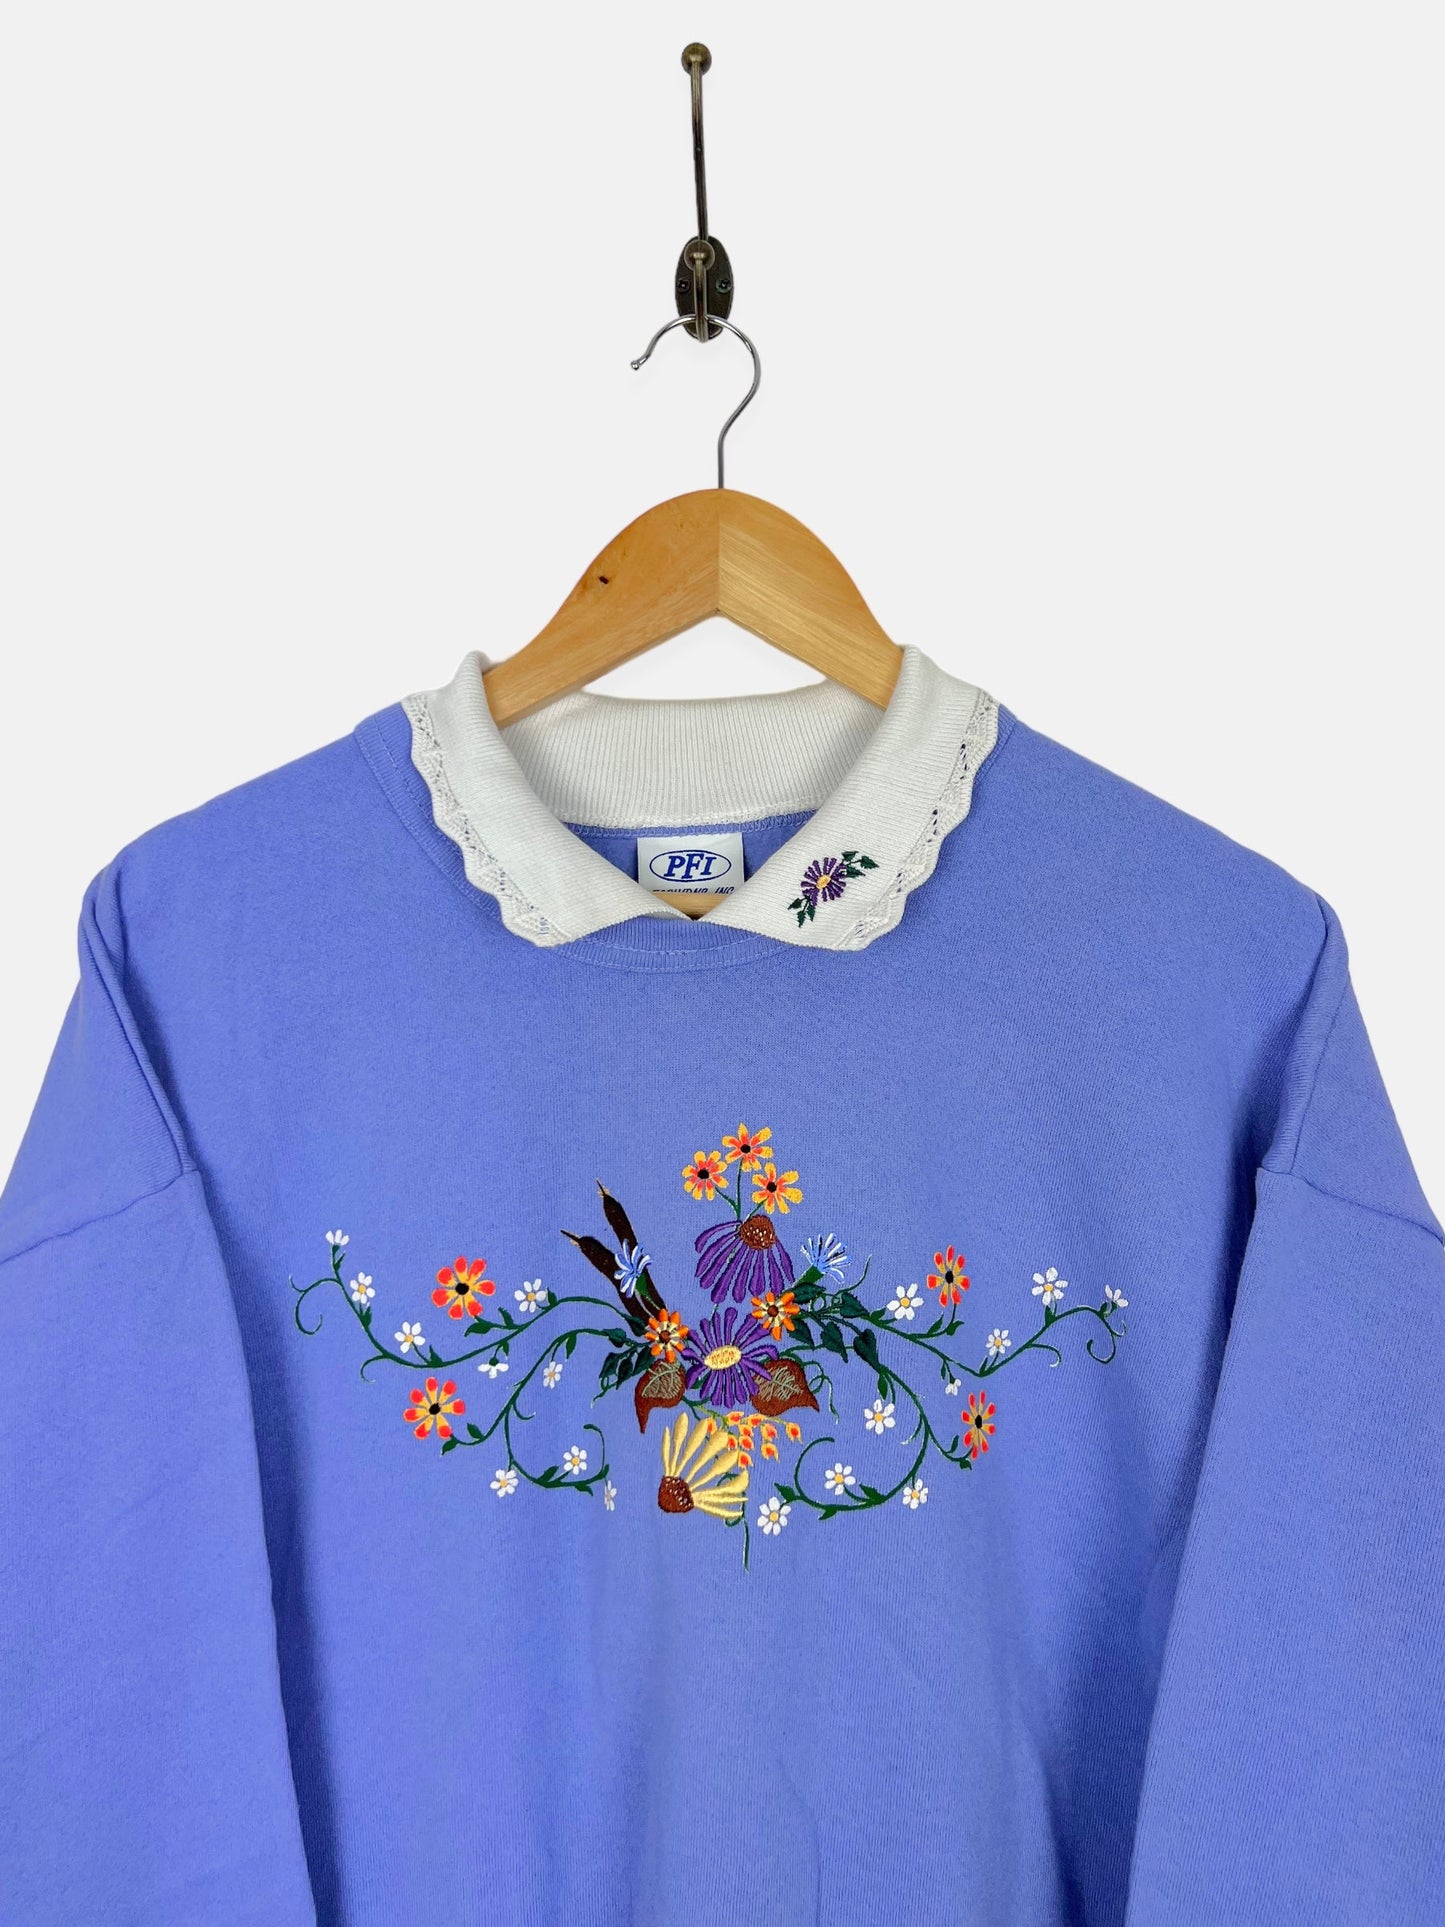 90's Floral USA Made Embroidered Vintage Collared Sweatshirt Size L